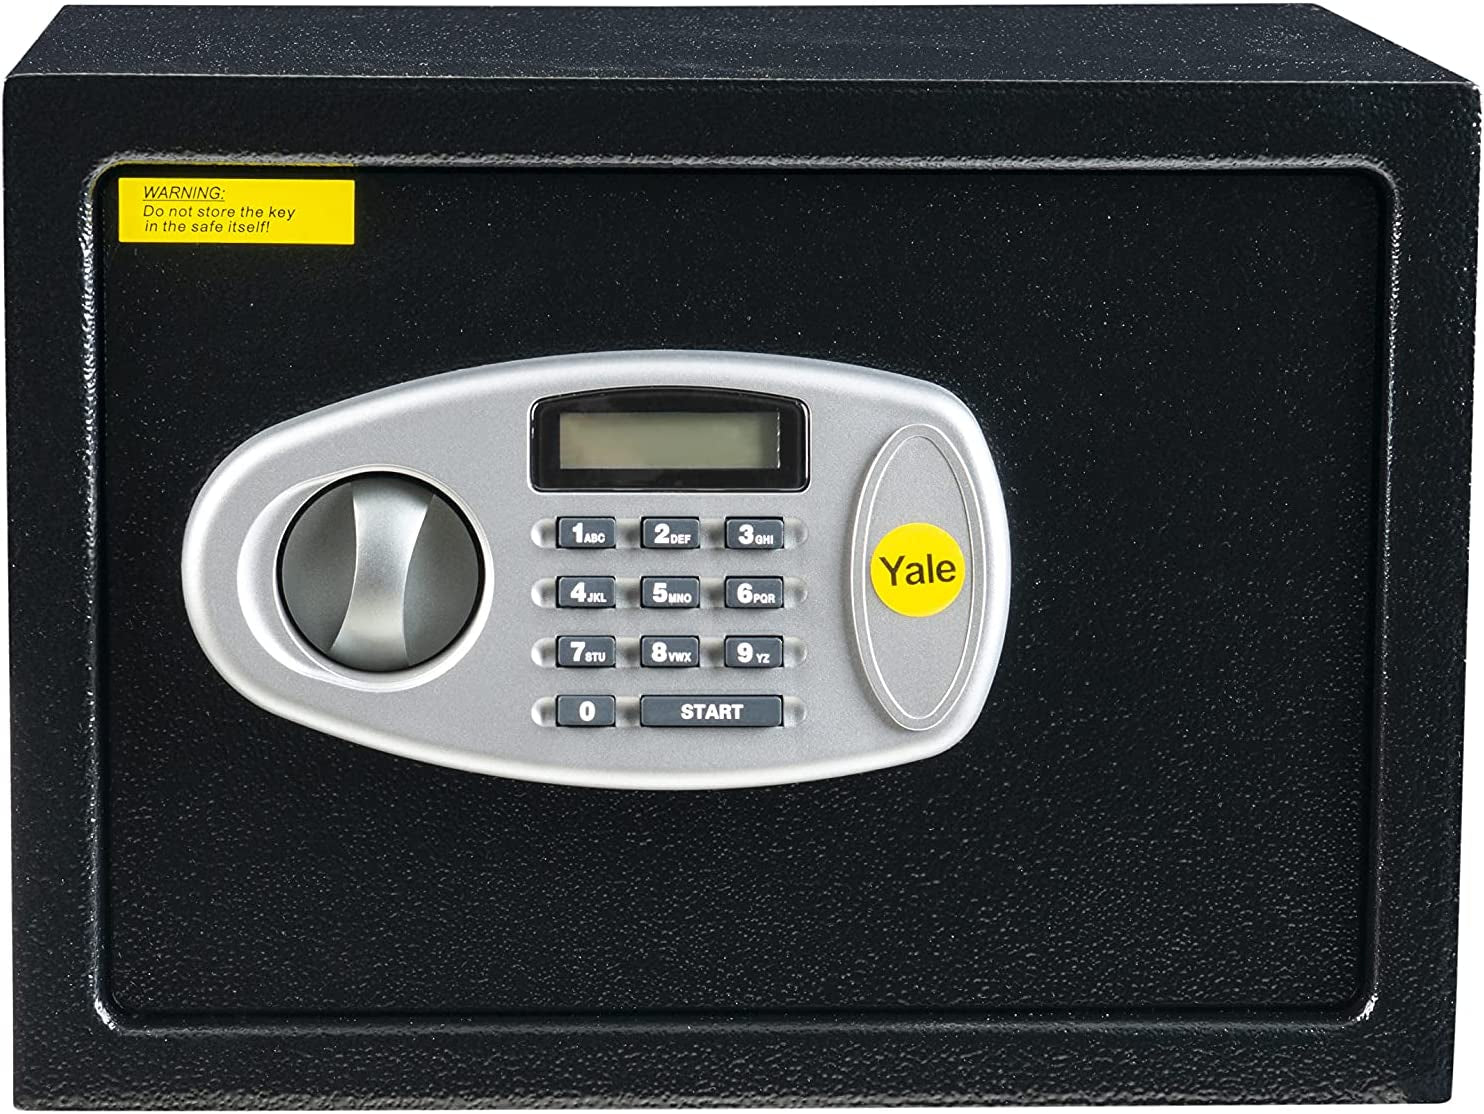 Y-MS0000NFP Medium Digital Safe, Steel Construction, LCD Display, Steel Locking Bolts, Emergency Override Key, Wall and Floor Fixings, 16 Litre Capacity 25 X 35 X 25 Cm, Home Office Safe , Black